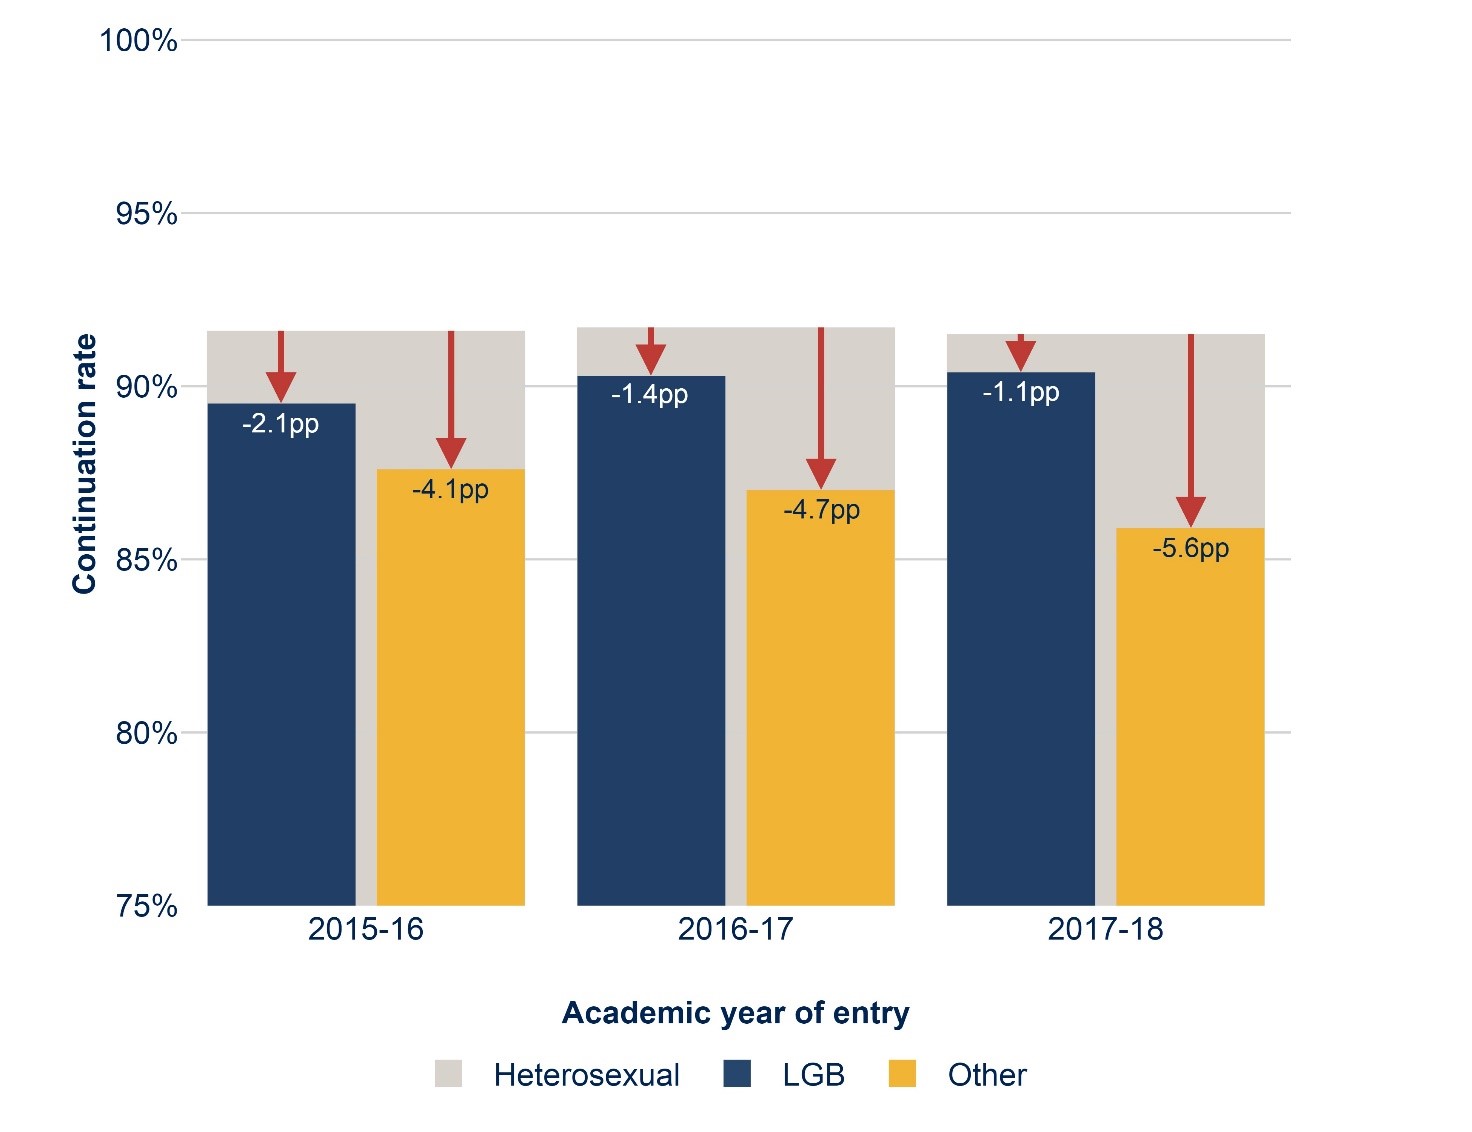 This is a bar chart that shows how the continuation rates of LGB students and students that are not heterosexual or LGB compared to heterosexual students between 2015-16 and 2017-18.